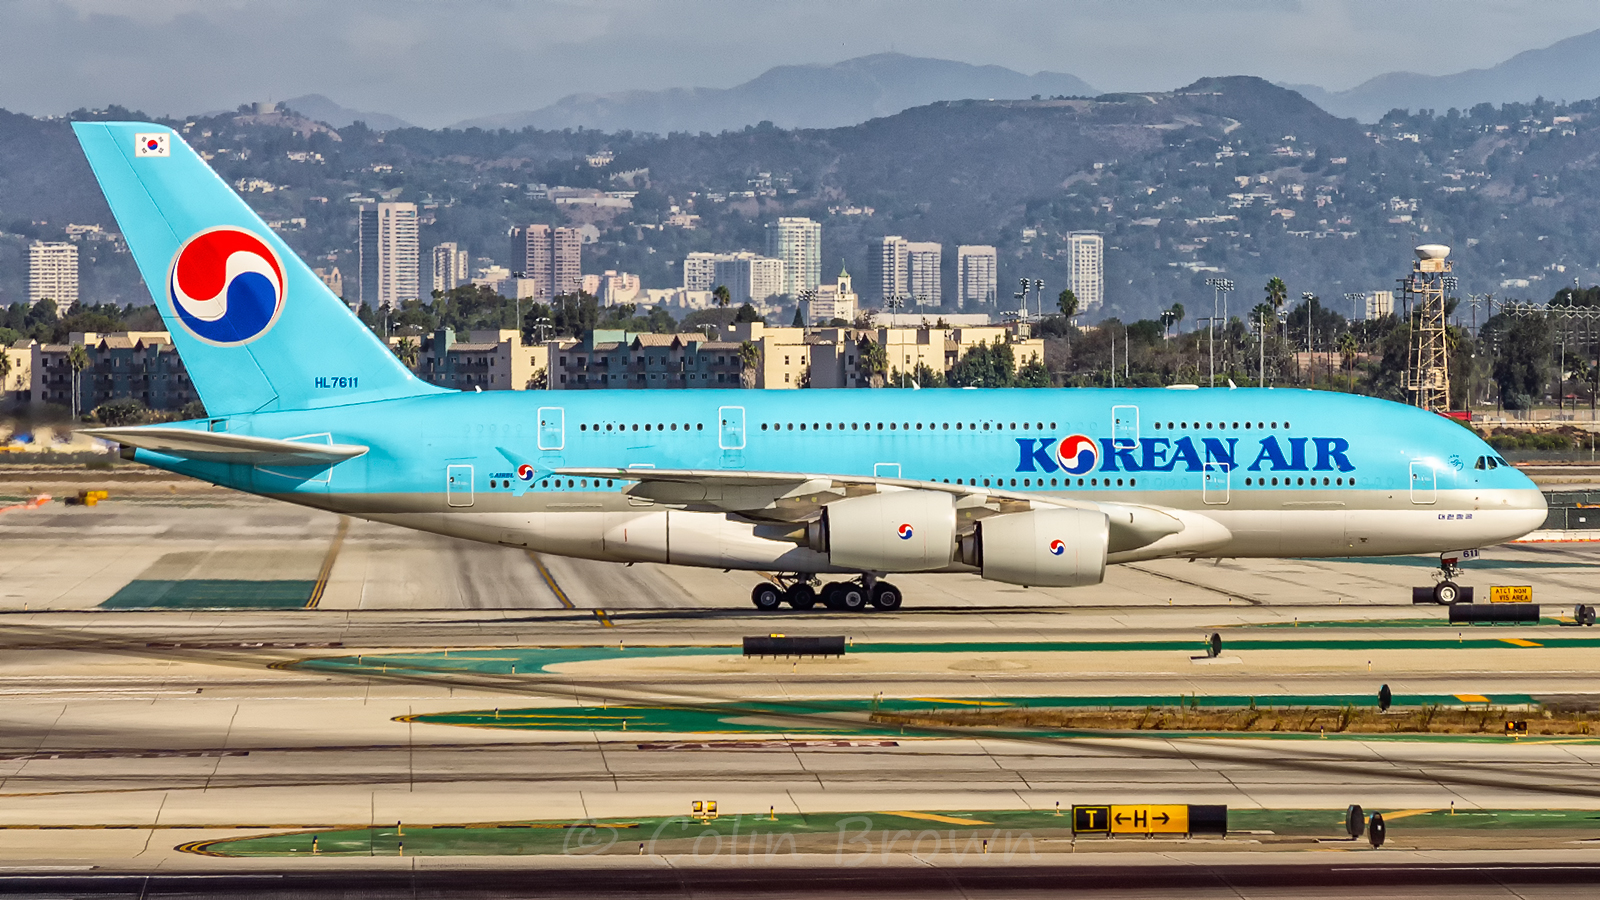 Korean airline company due to pandemic launches flights “to nowhere”